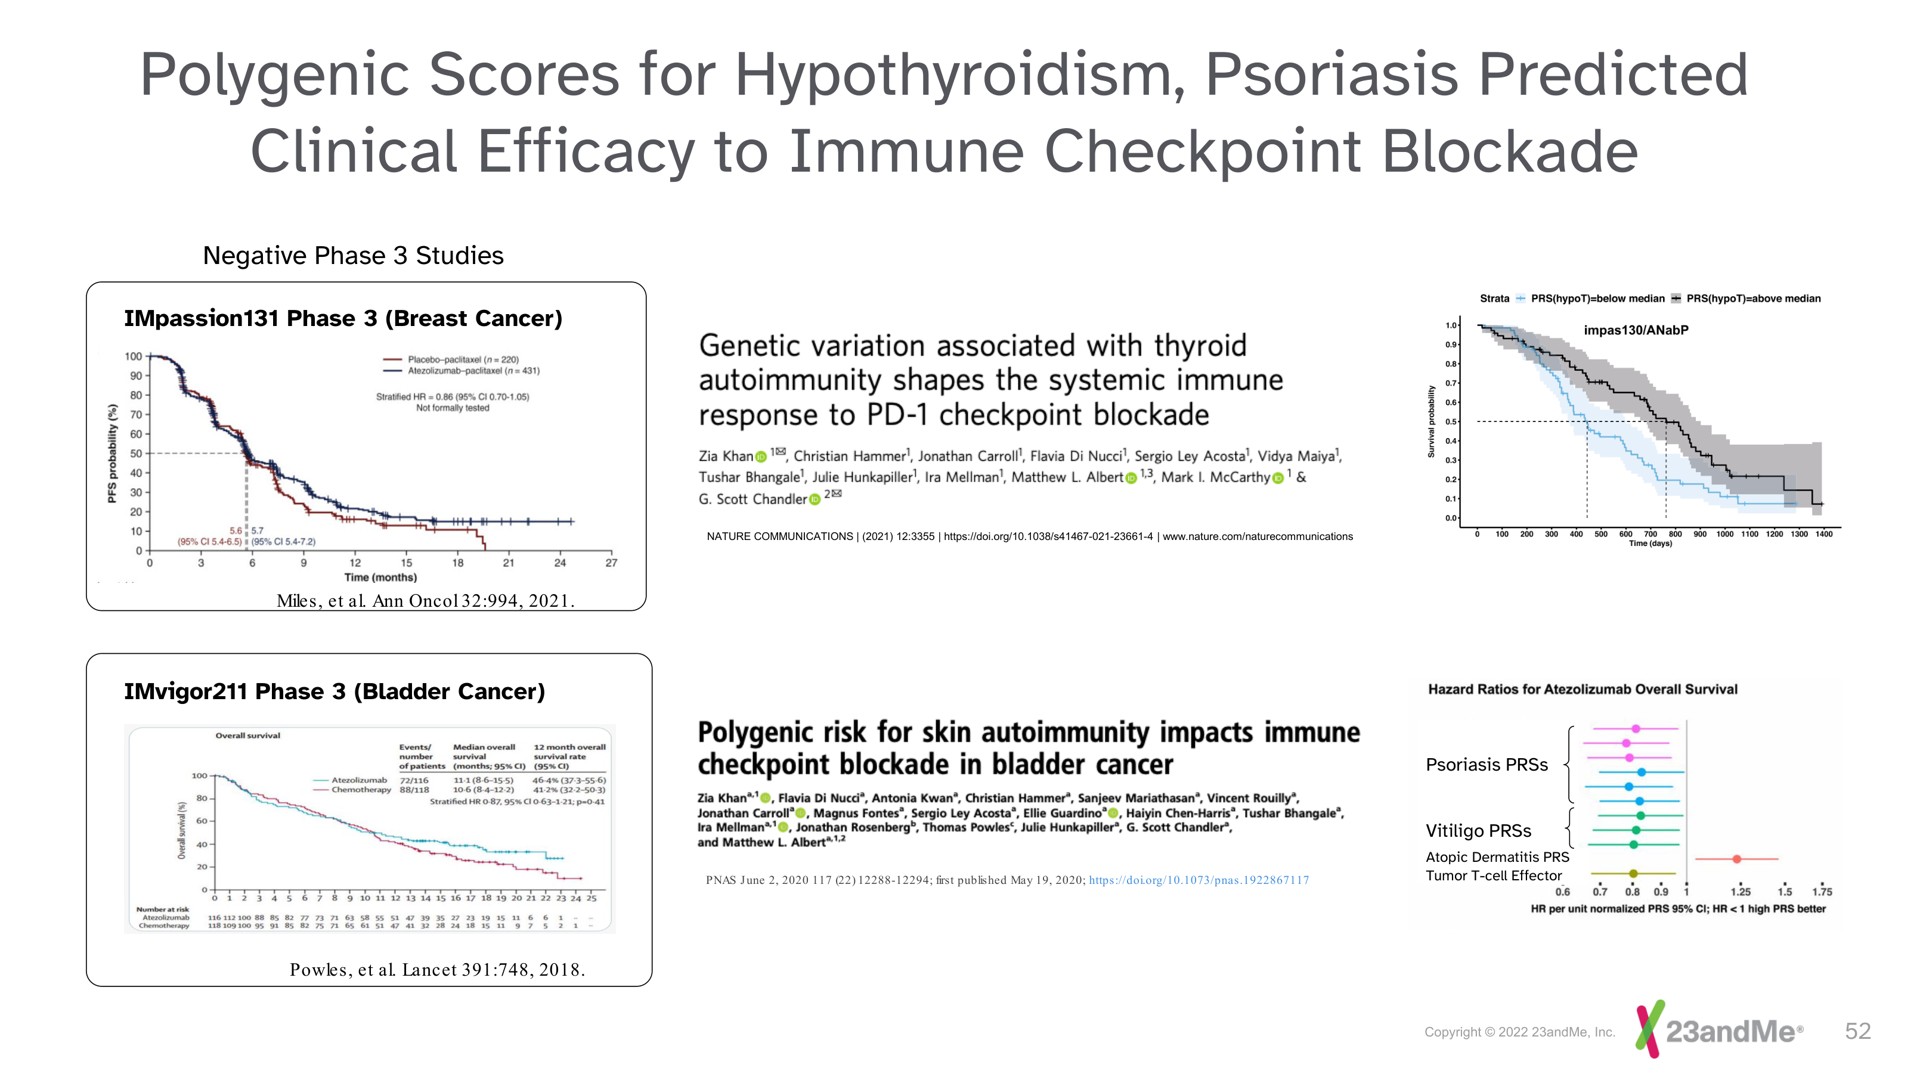 polygenic scores for hypothyroidism psoriasis predicted clinical efficacy to immune blockade | 23andMe